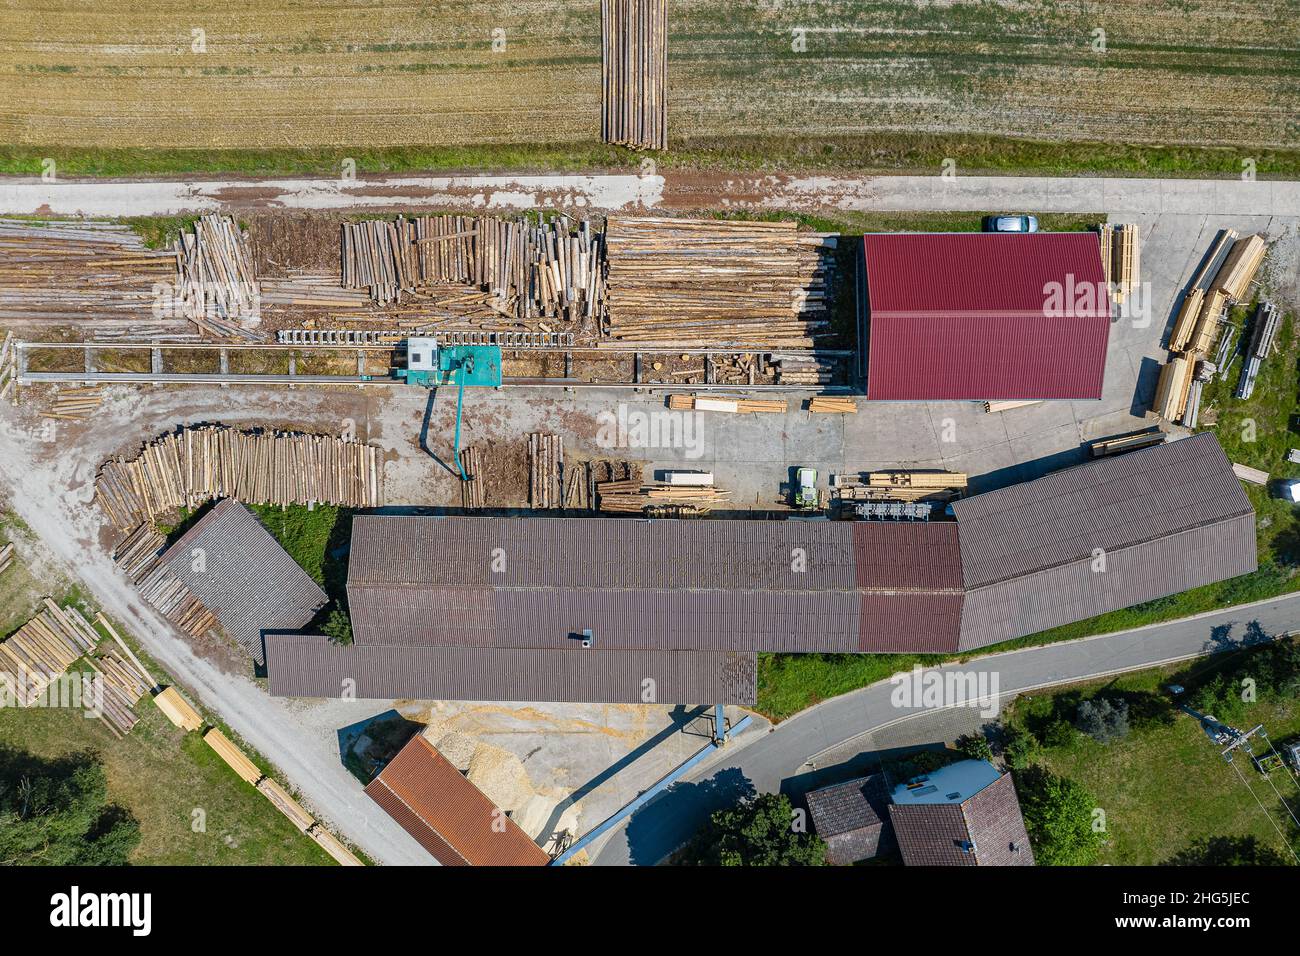 aerial view of sawmill with buildings and machines Stock Photo